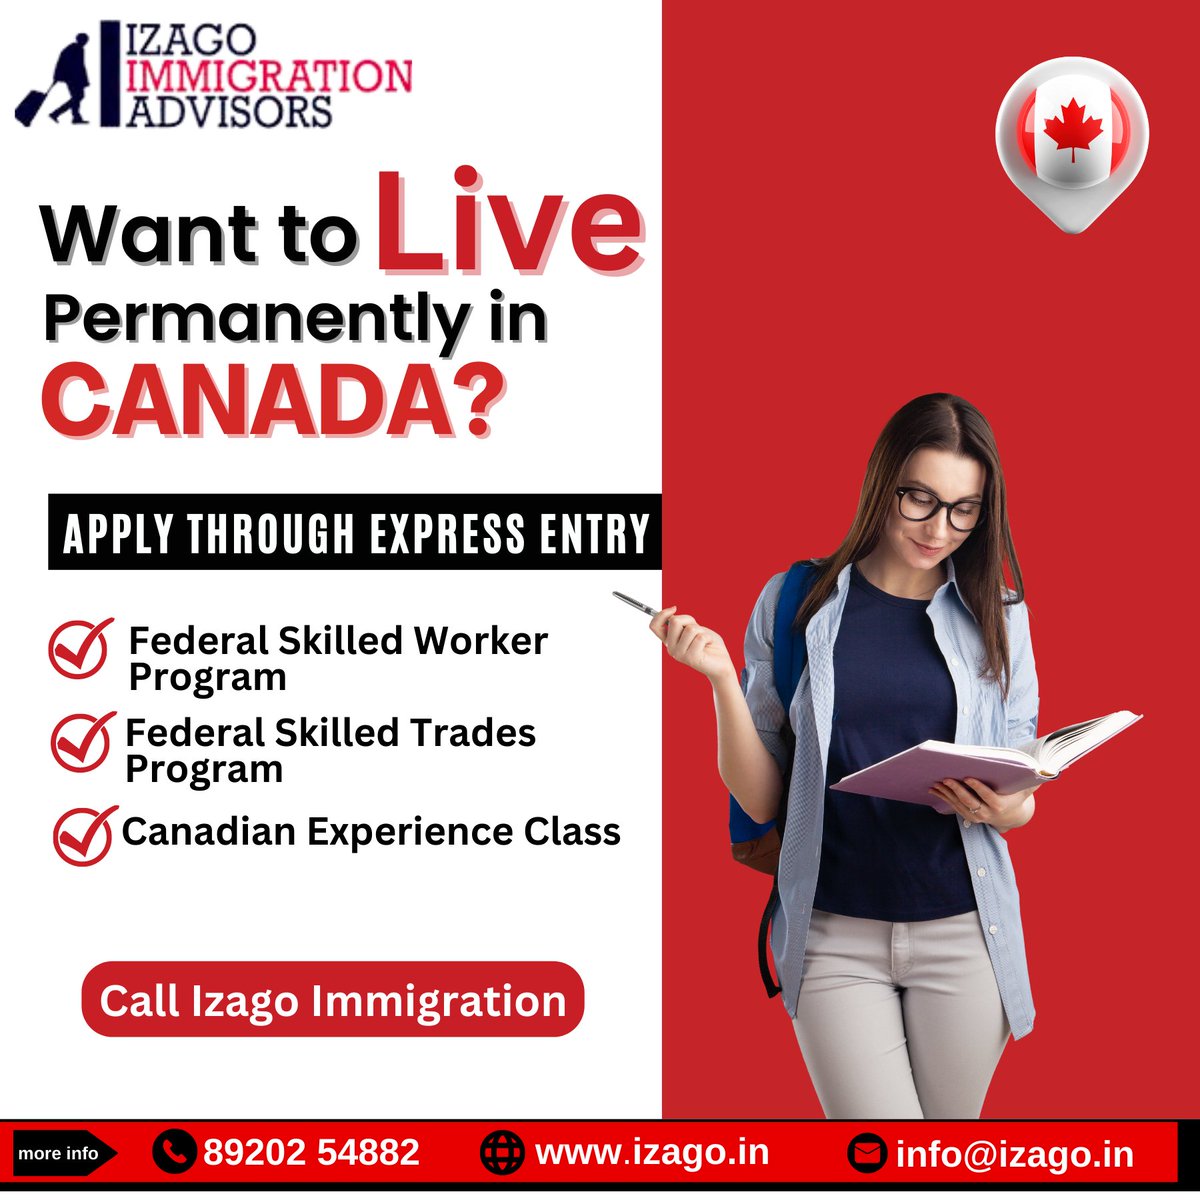 Want to live in permanently in Canada?
For more information call us at +91-89202 54882 or drop an email to us at info@izago.in 
bit.ly/3SzMLpD#immigr… #canada #immigration #canadapermanentresidencevisa #canada #nationwidevisas #izago #immigration #izago #immigration